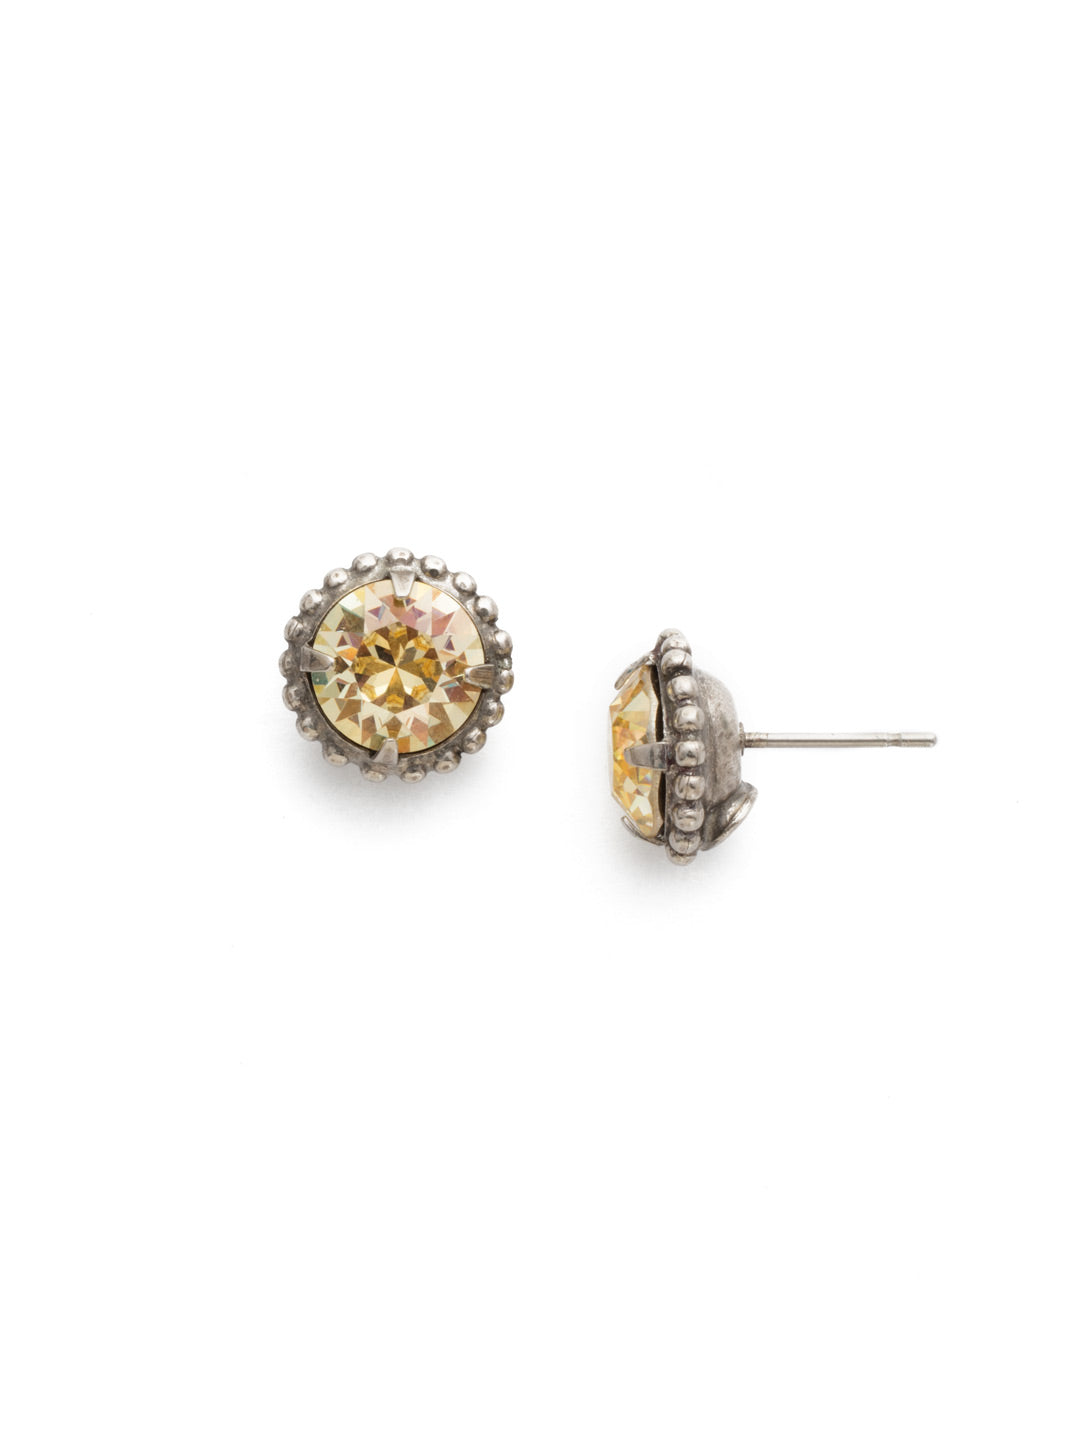 Simplicity Stud Earring - EBY38ASCCH - <p>A timeless classic, the Simplicity Stud Earrings feature round cut crystals in a variety of colors; accented with a halo of metal beaded detail. From Sorrelli's Crystal Champagne collection in our Antique Silver-tone finish.</p>